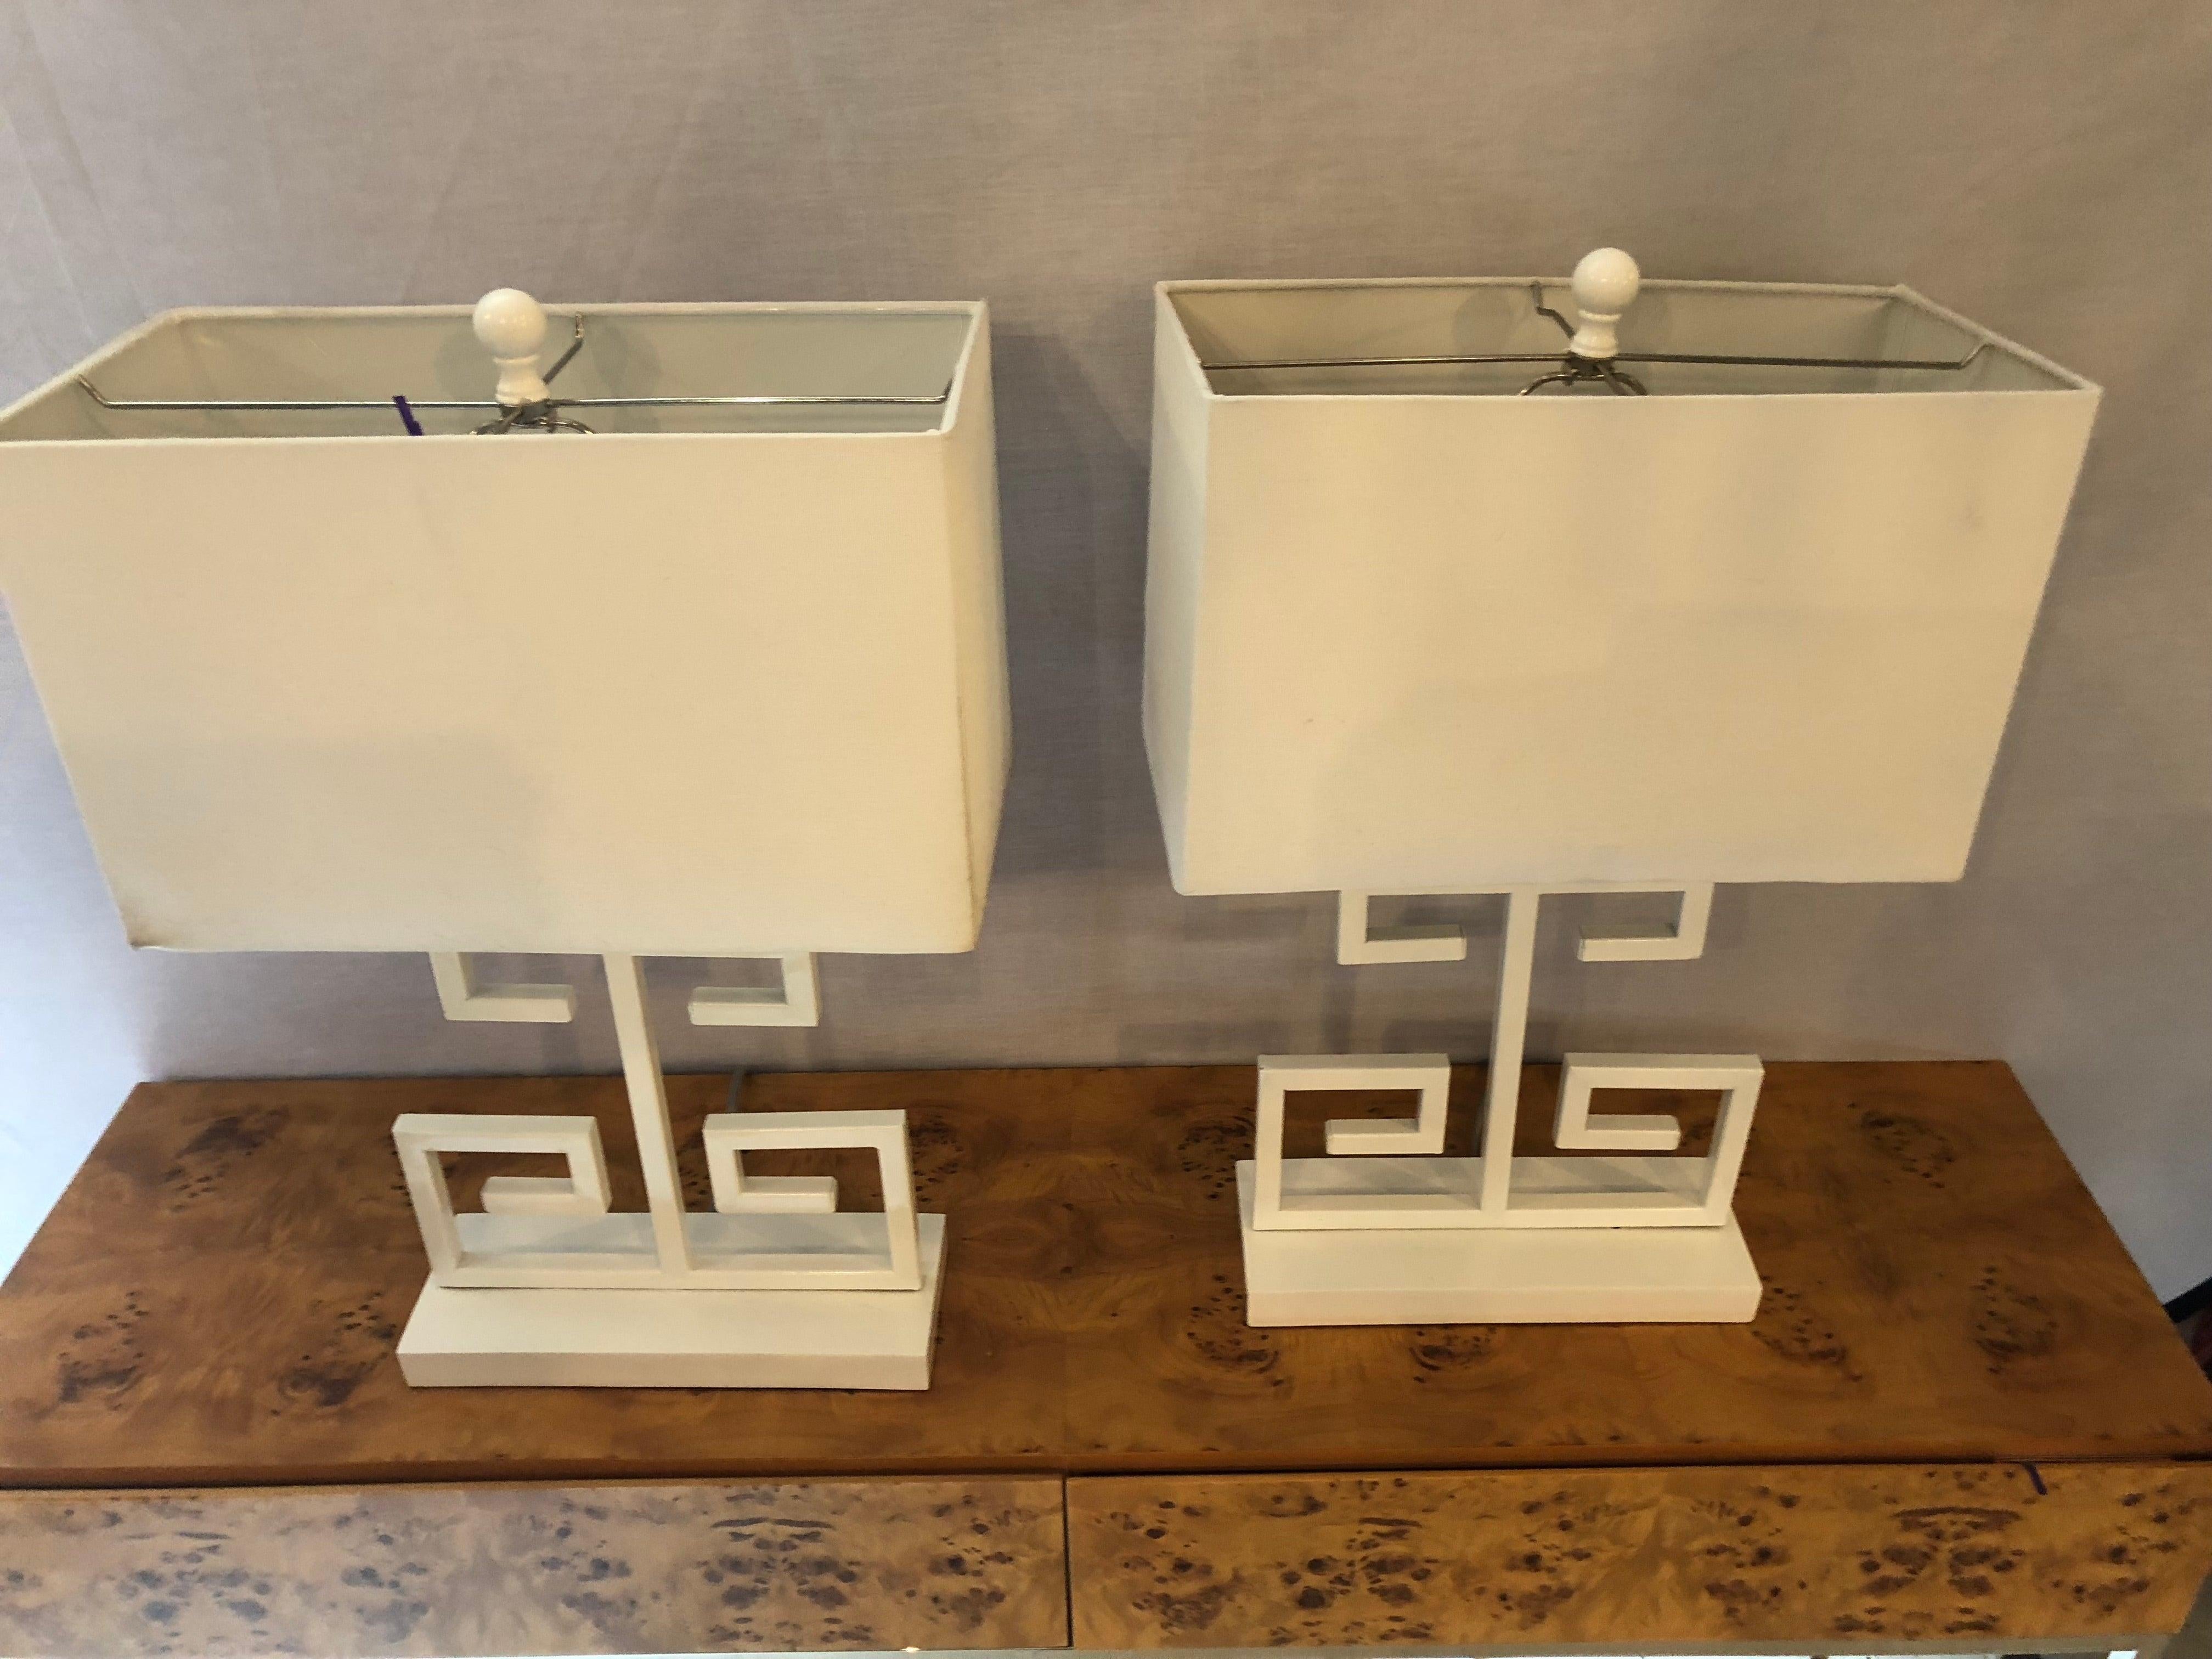 Pair of white modern Art Deco style table lamps with shades. Having a sleek and stylish design these geometric table lamps are certain to 